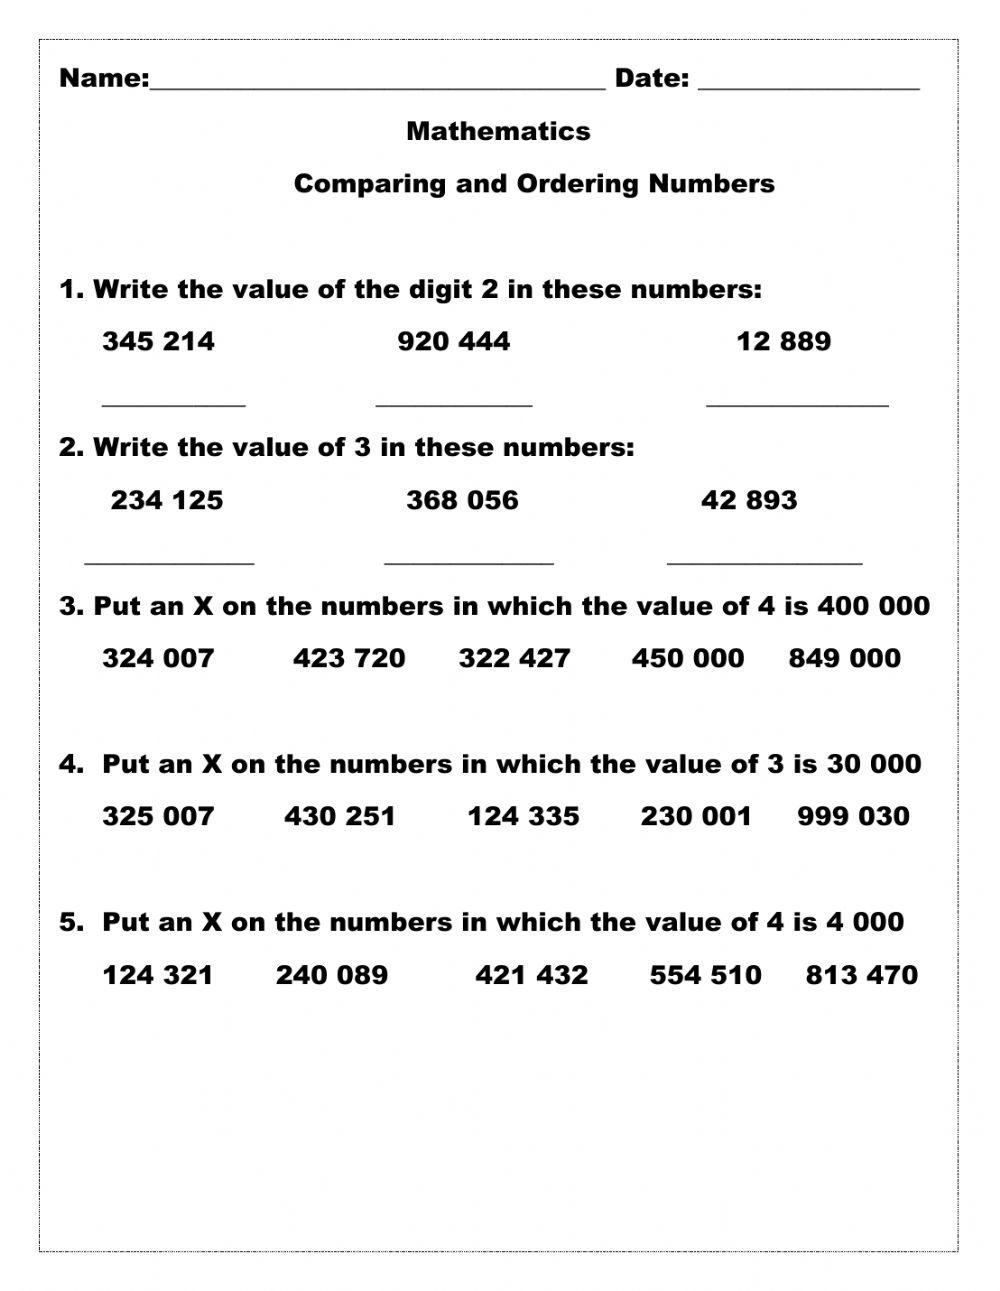 Comparing and Ordering Whole Numbers Worksheet